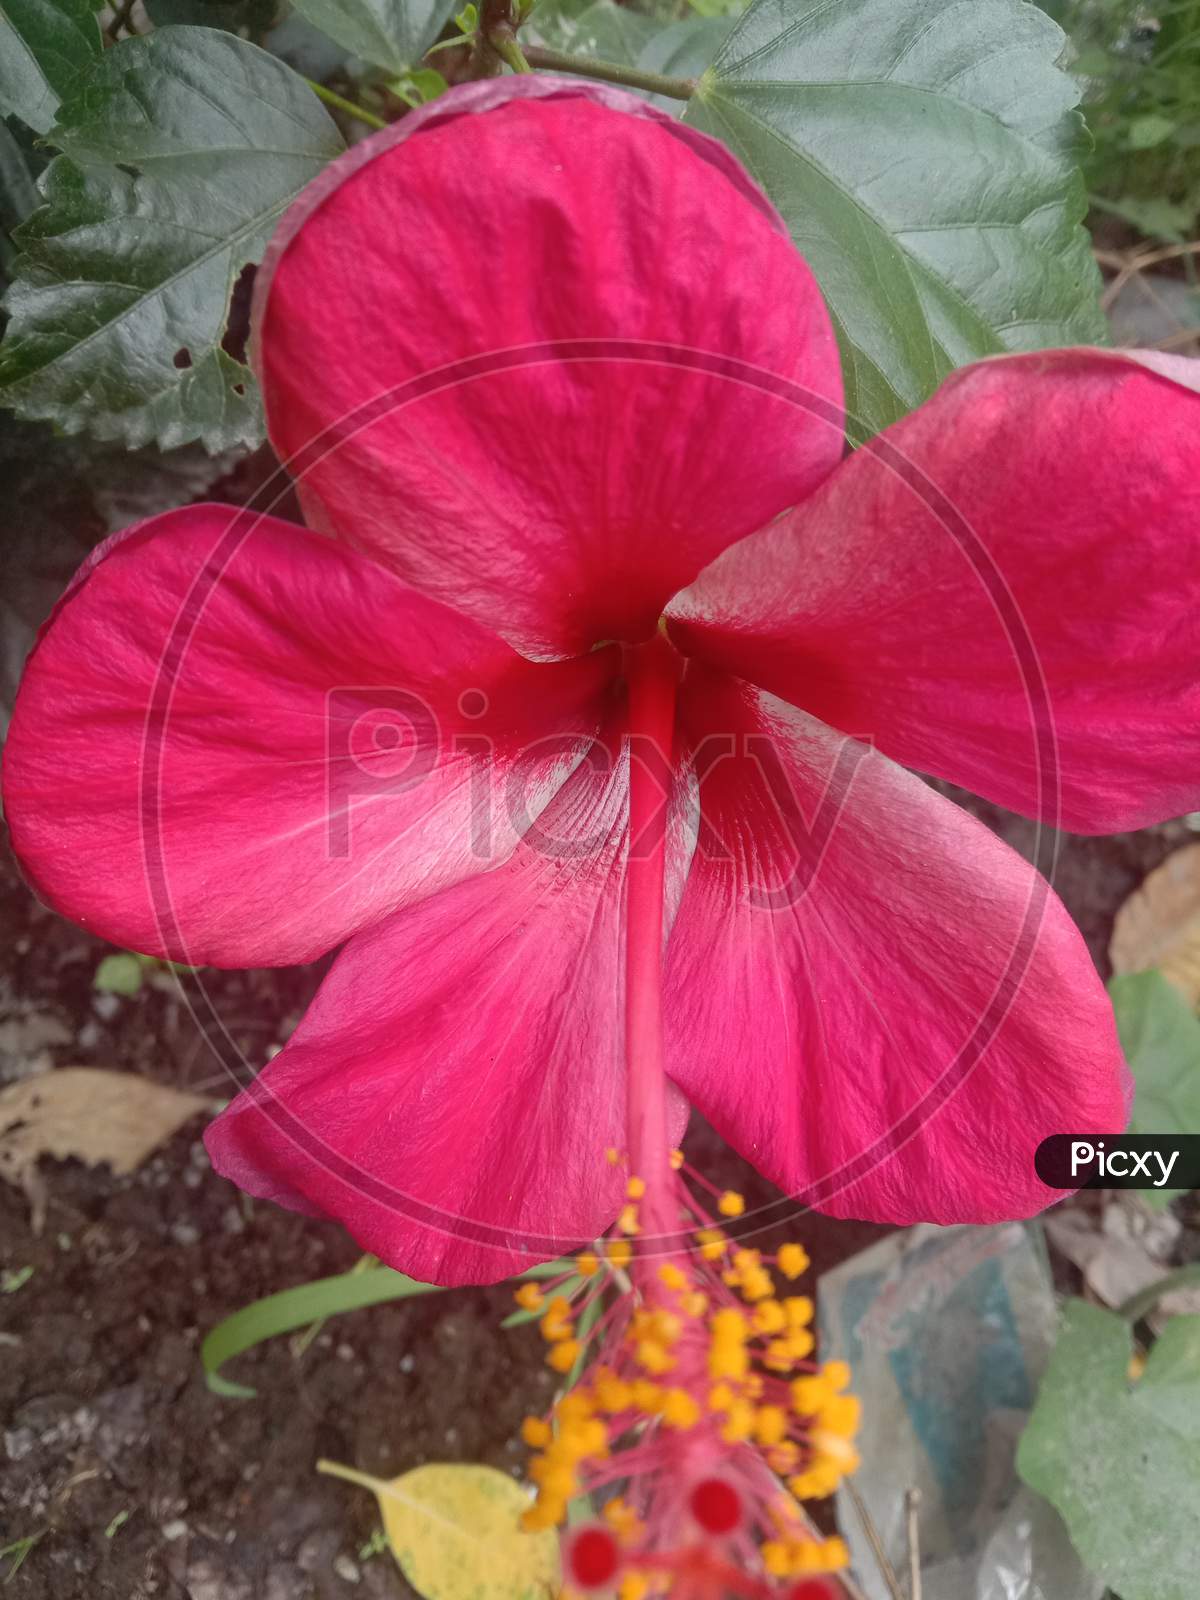 a beautiful looking hibiscus flower.